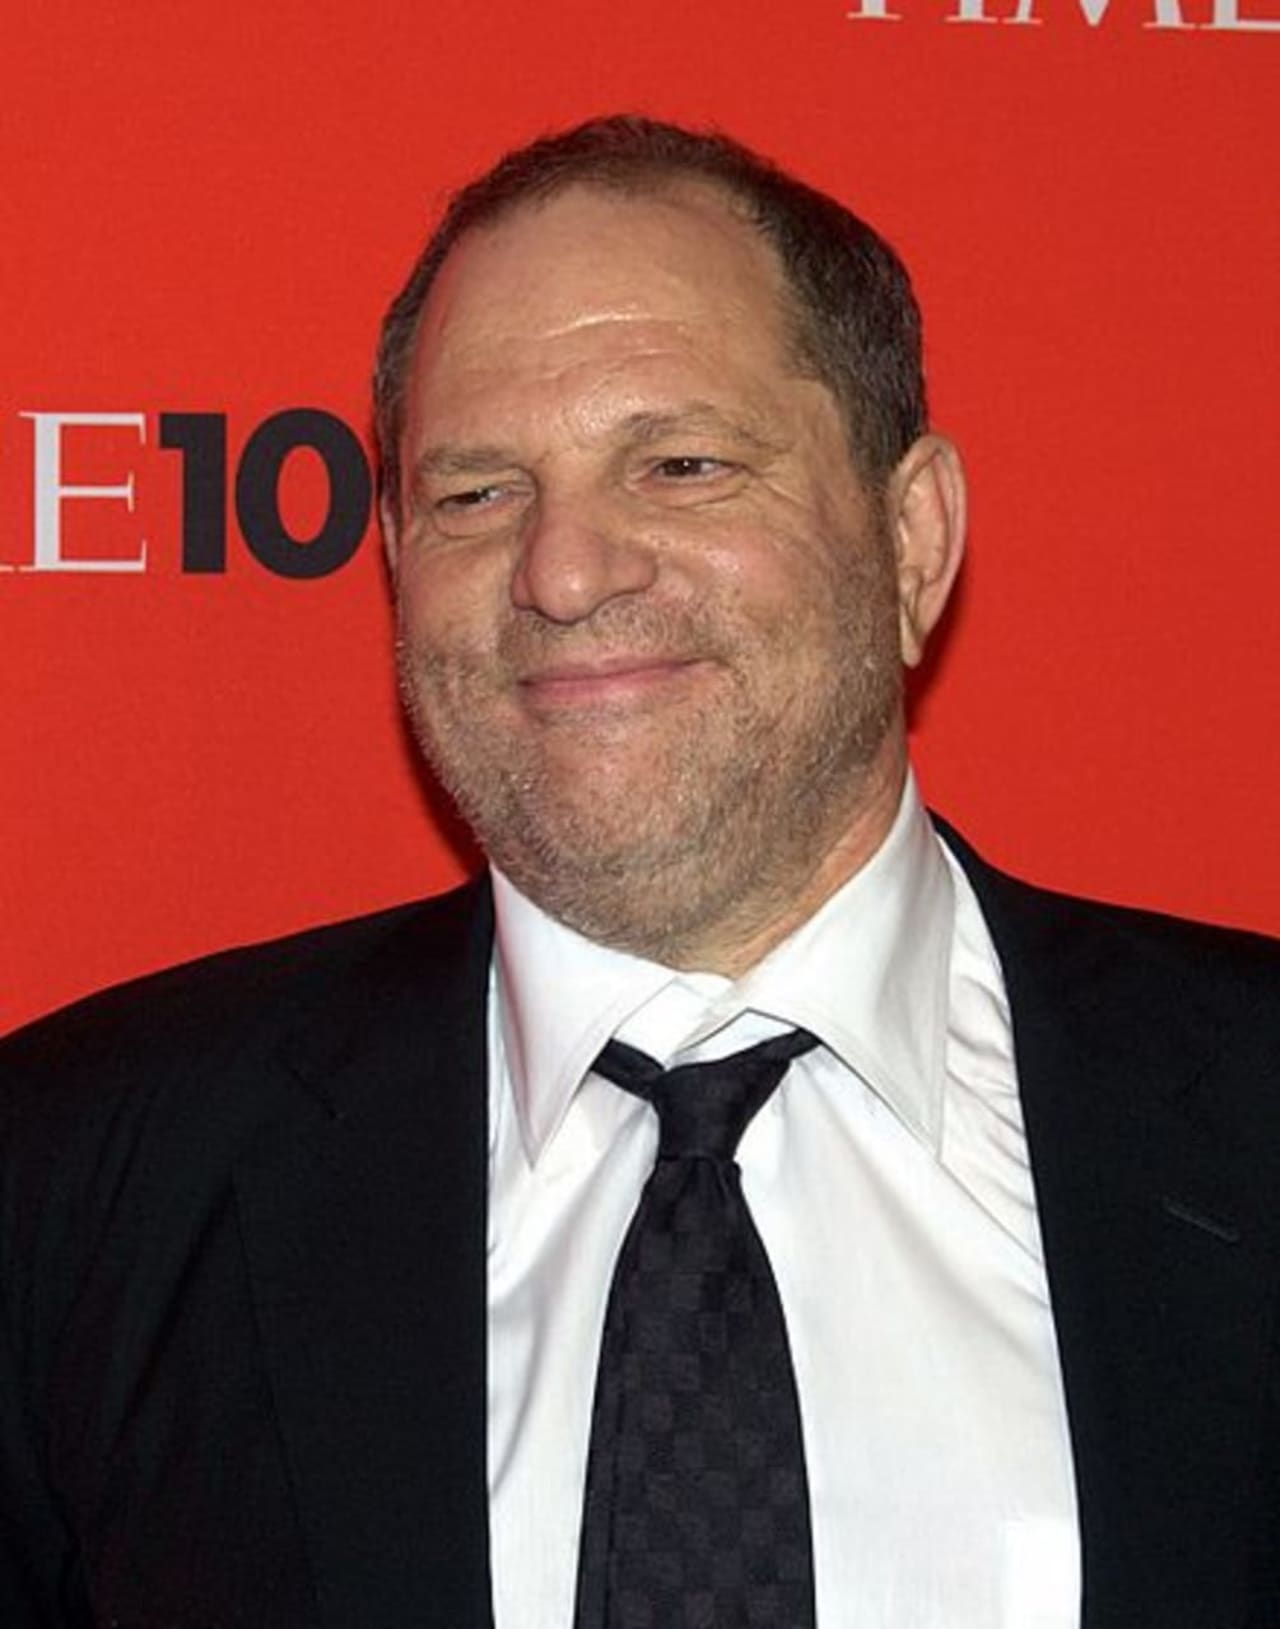 SUNY Buffalo announced that it will revoke an honorary degree that it bestowed upon Harvey Weinstein in 2000.